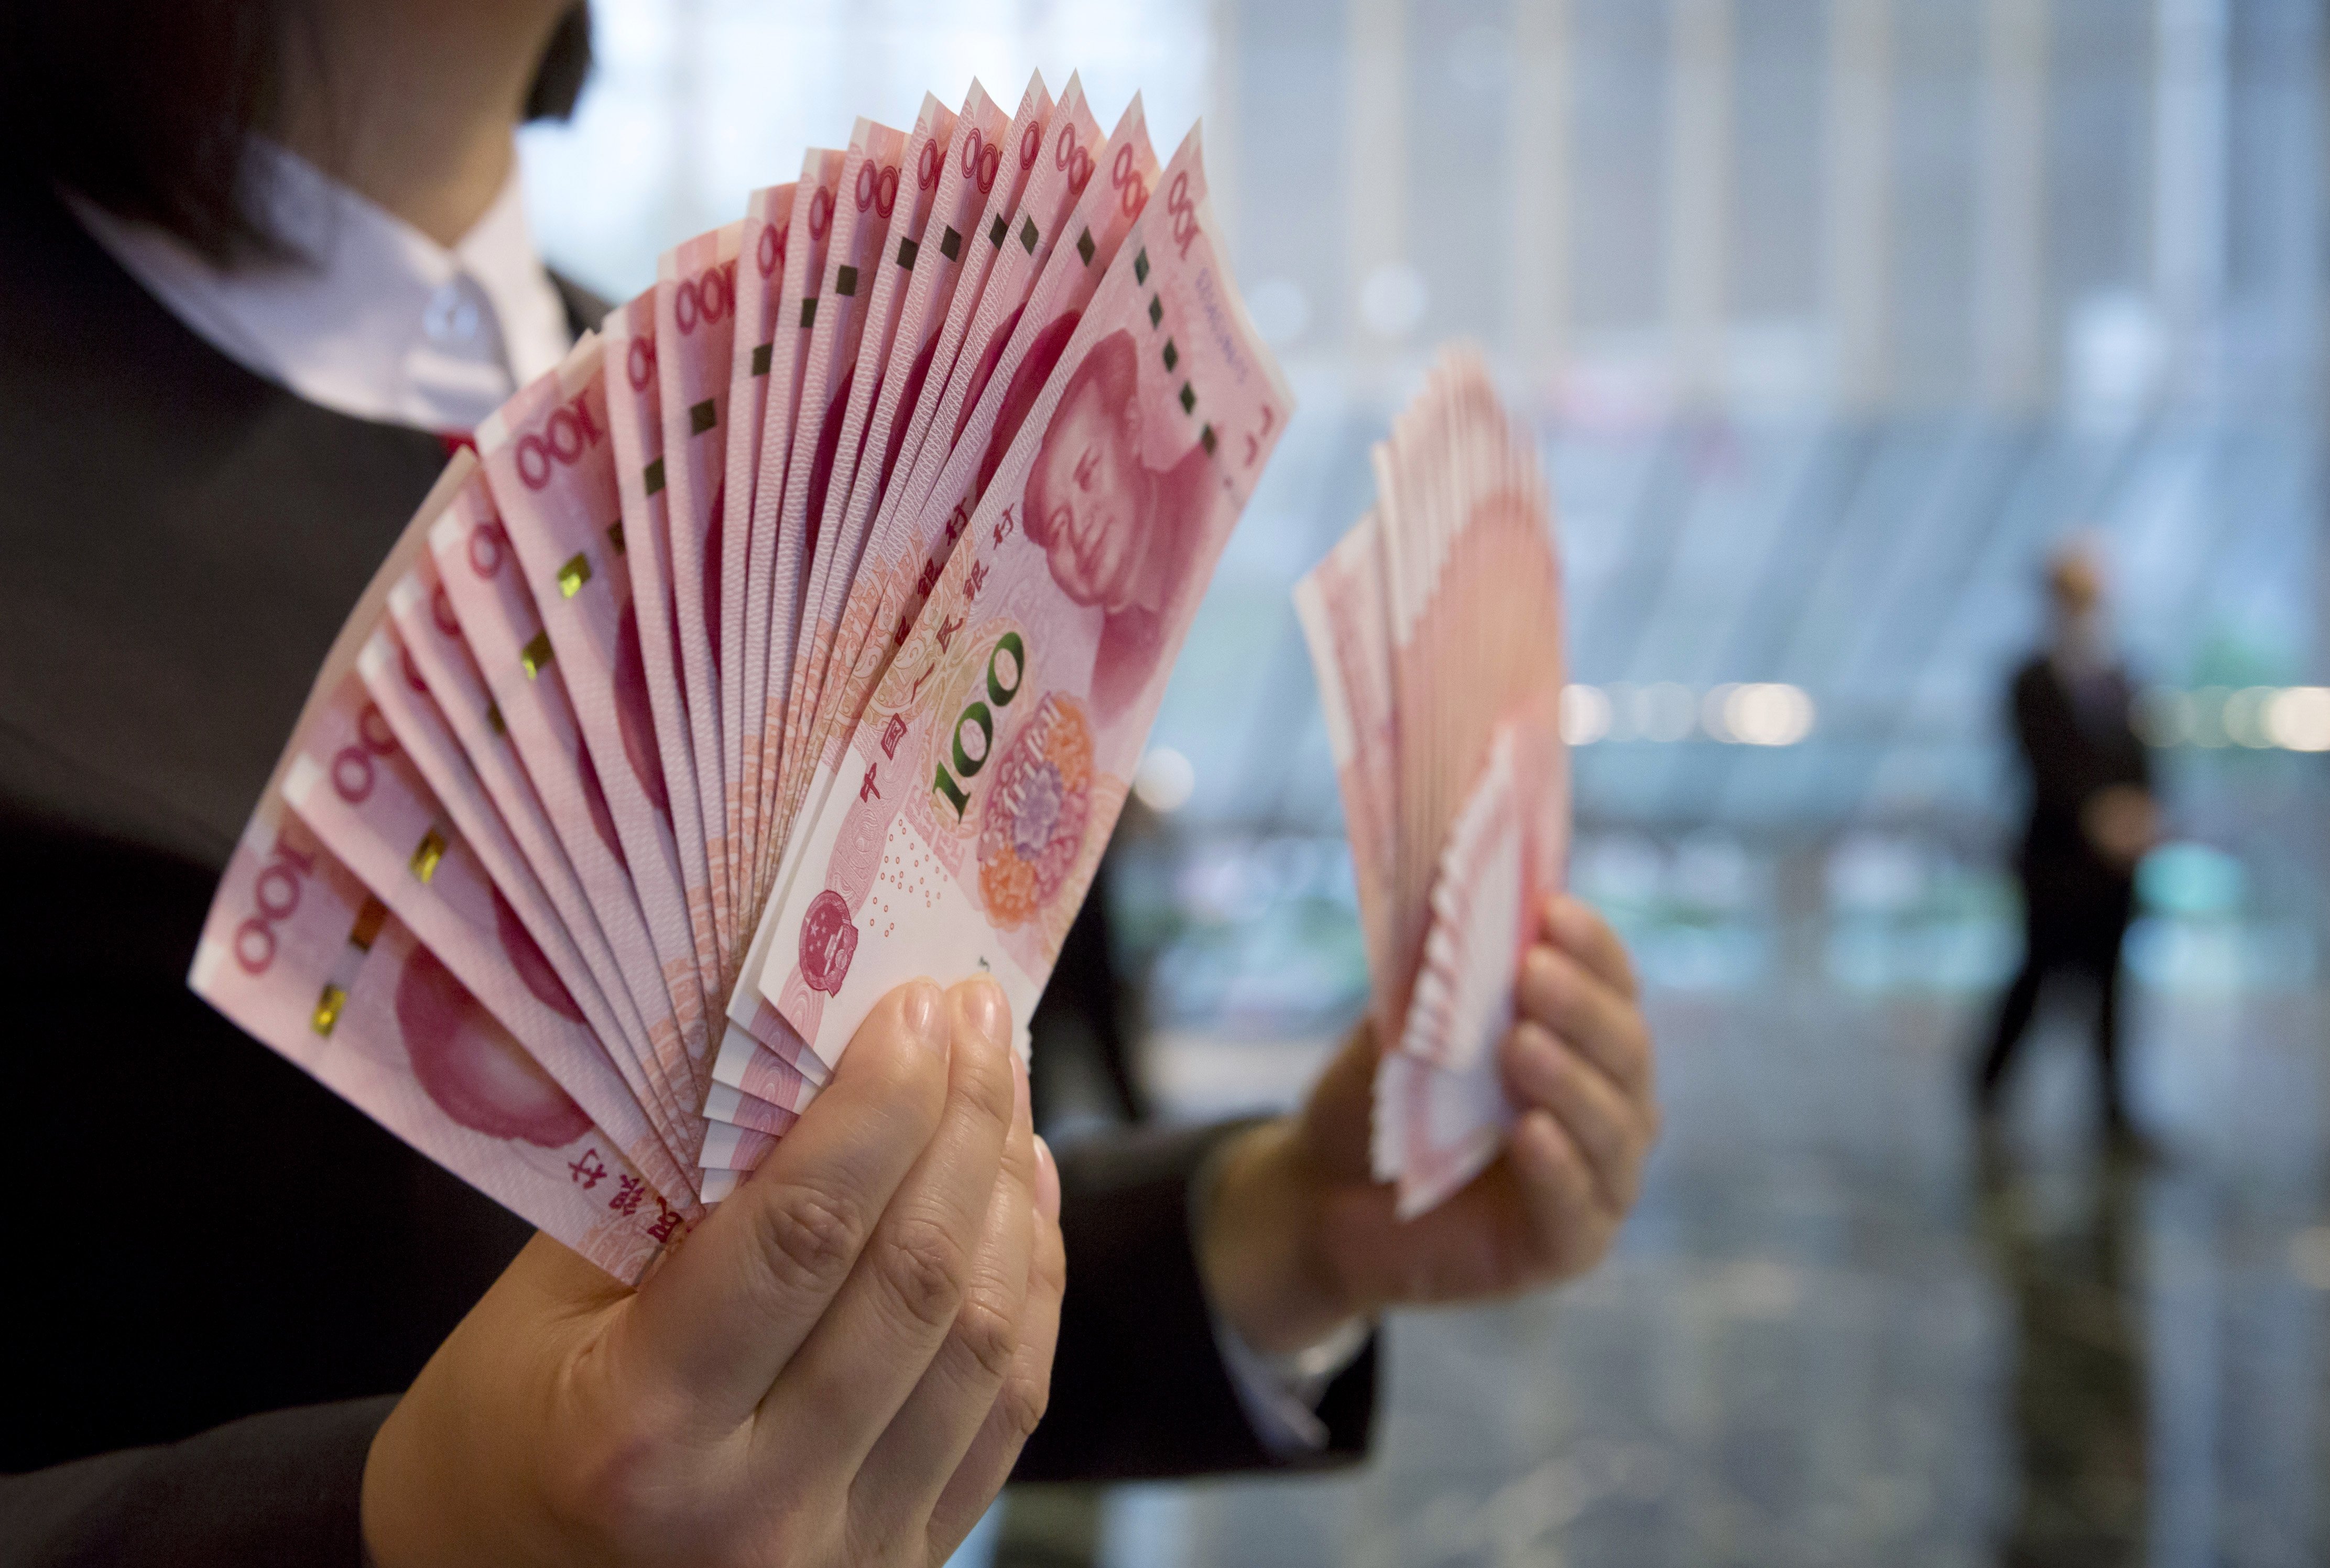 A staff member displays the new version of the 100-yuan RMB banknotes for photographers at the Bank of China Tower in Hong Kong, Thursday, Nov. 12, 2015. China released Thursday a new version of the 100-yuan bill, which bears a golden "100" and adopts advanced anti-counterfeit technology. The "100" on the new bill appears golden from certain angles. (AP Photo/Kin Cheung)